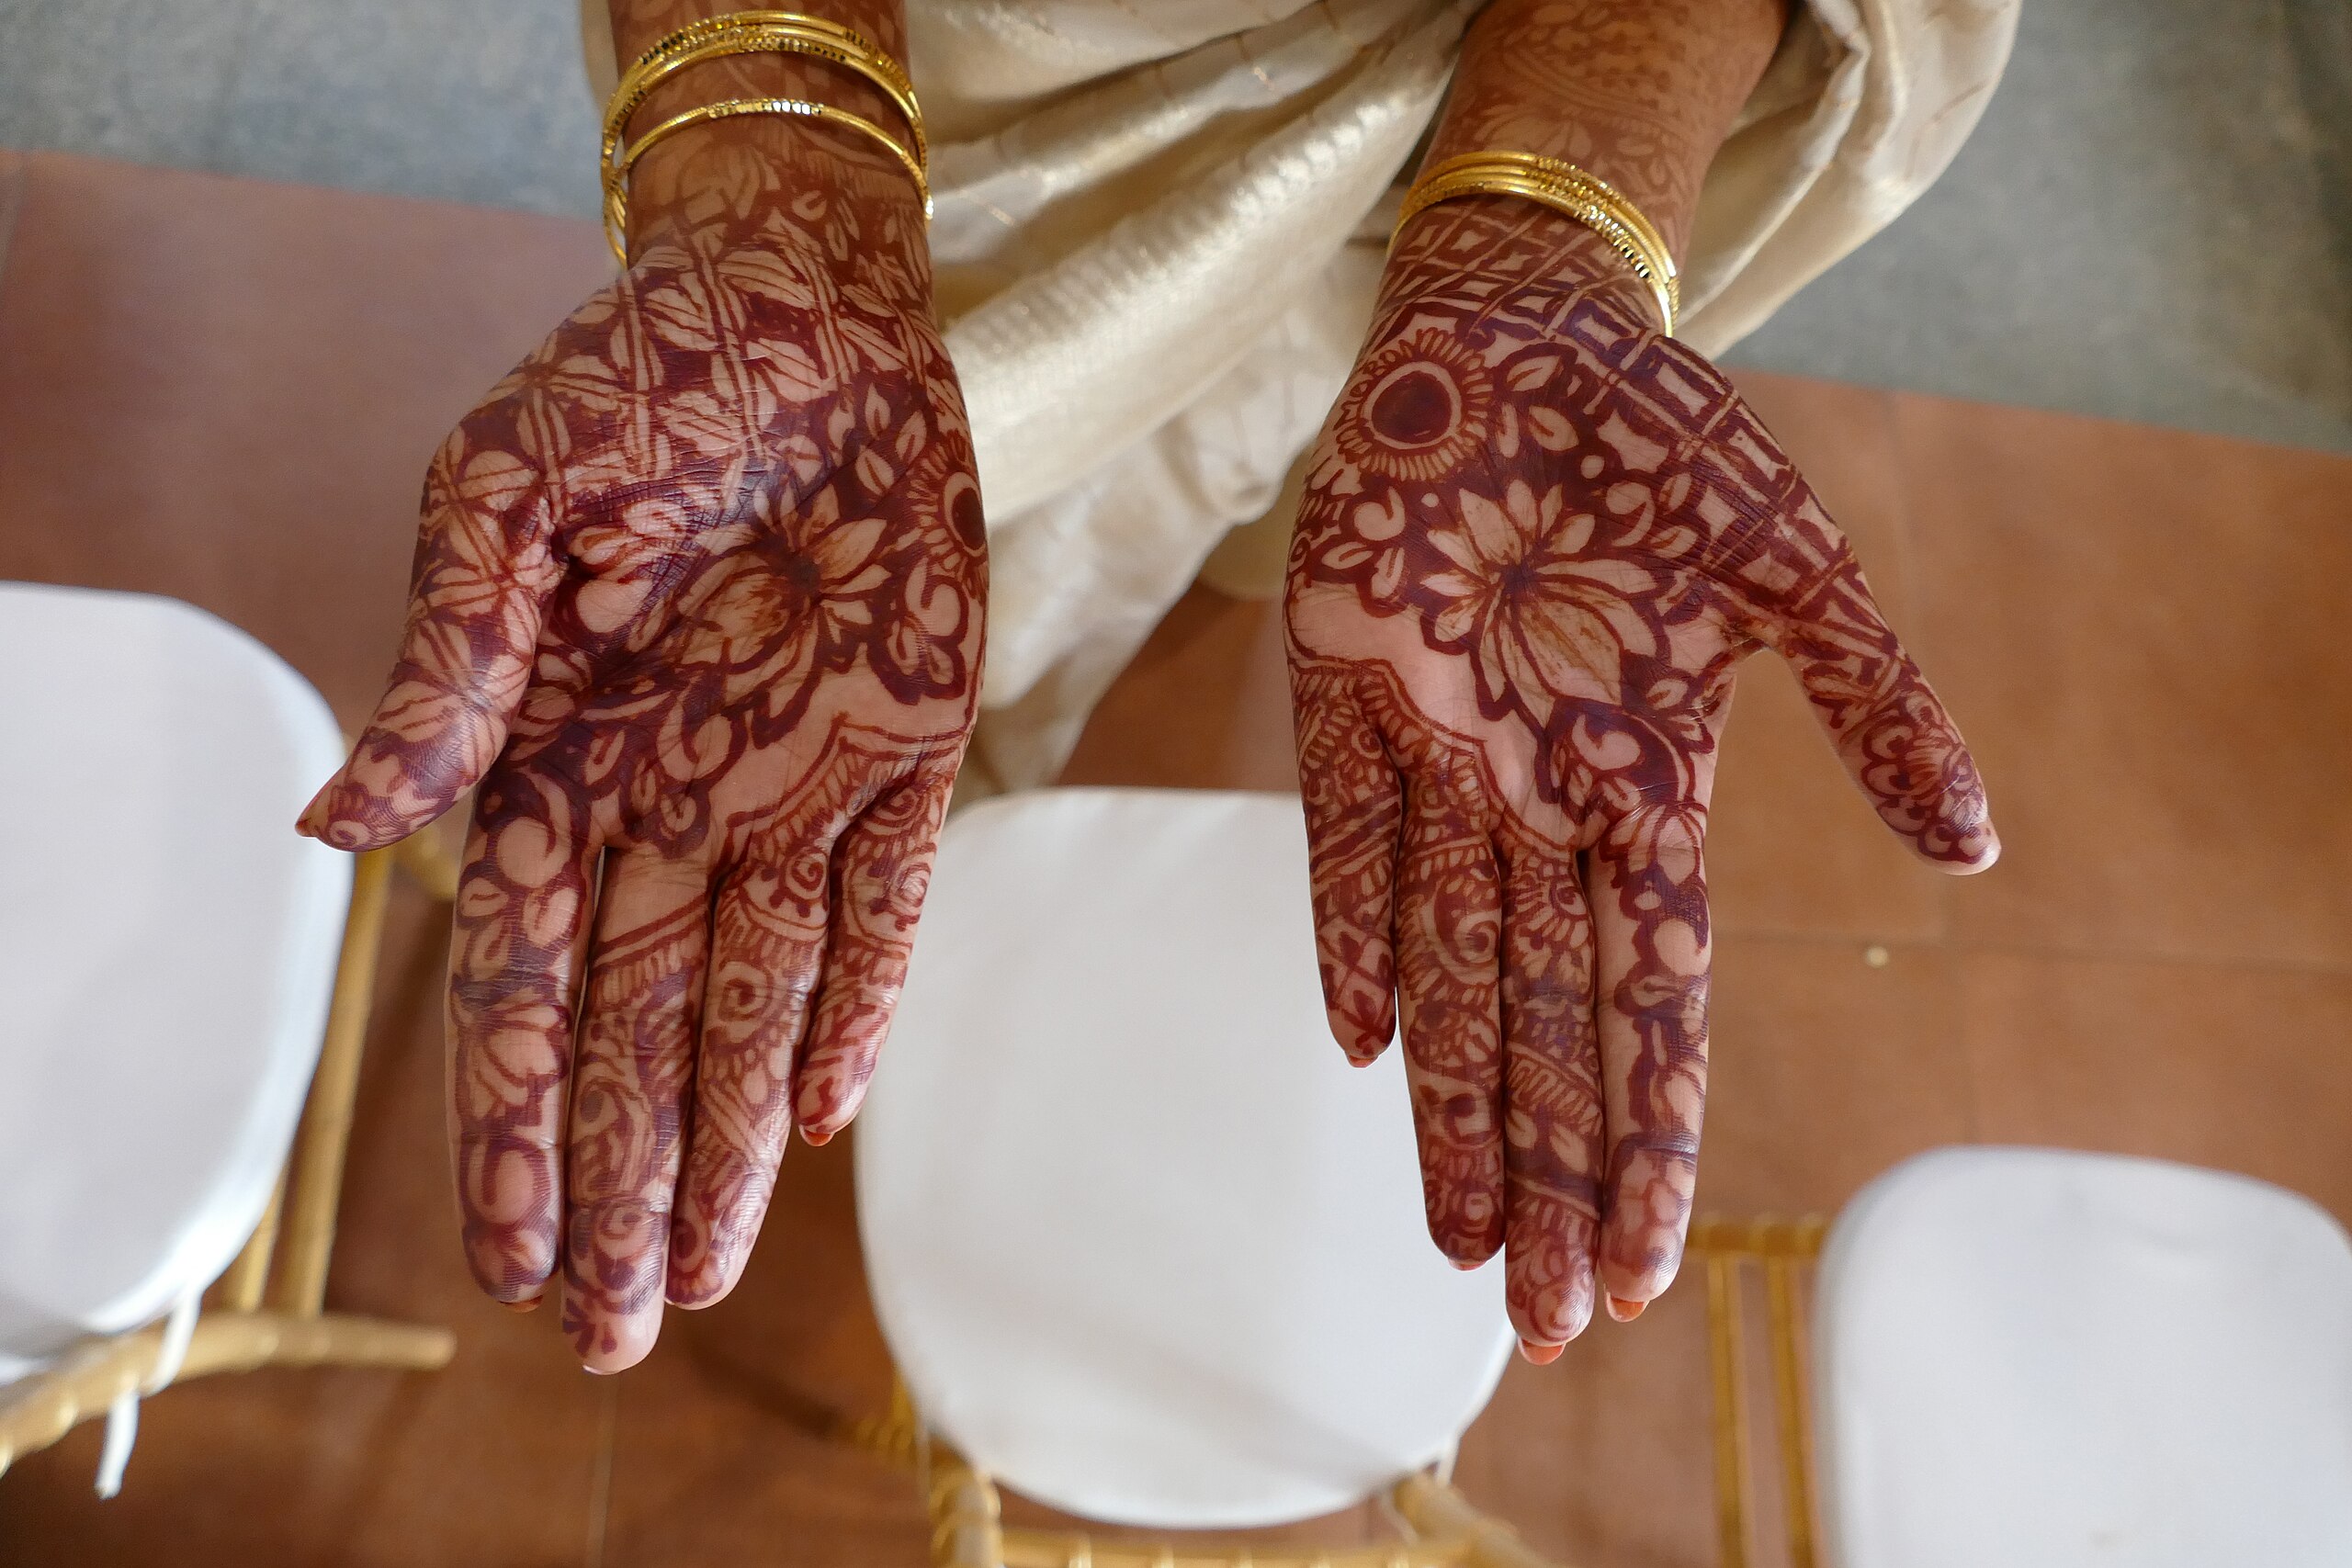 A woman with a henna tattoo on her arm. Henna mehndi mehndi designs, beauty  fashion. - PICRYL - Public Domain Media Search Engine Public Domain Search